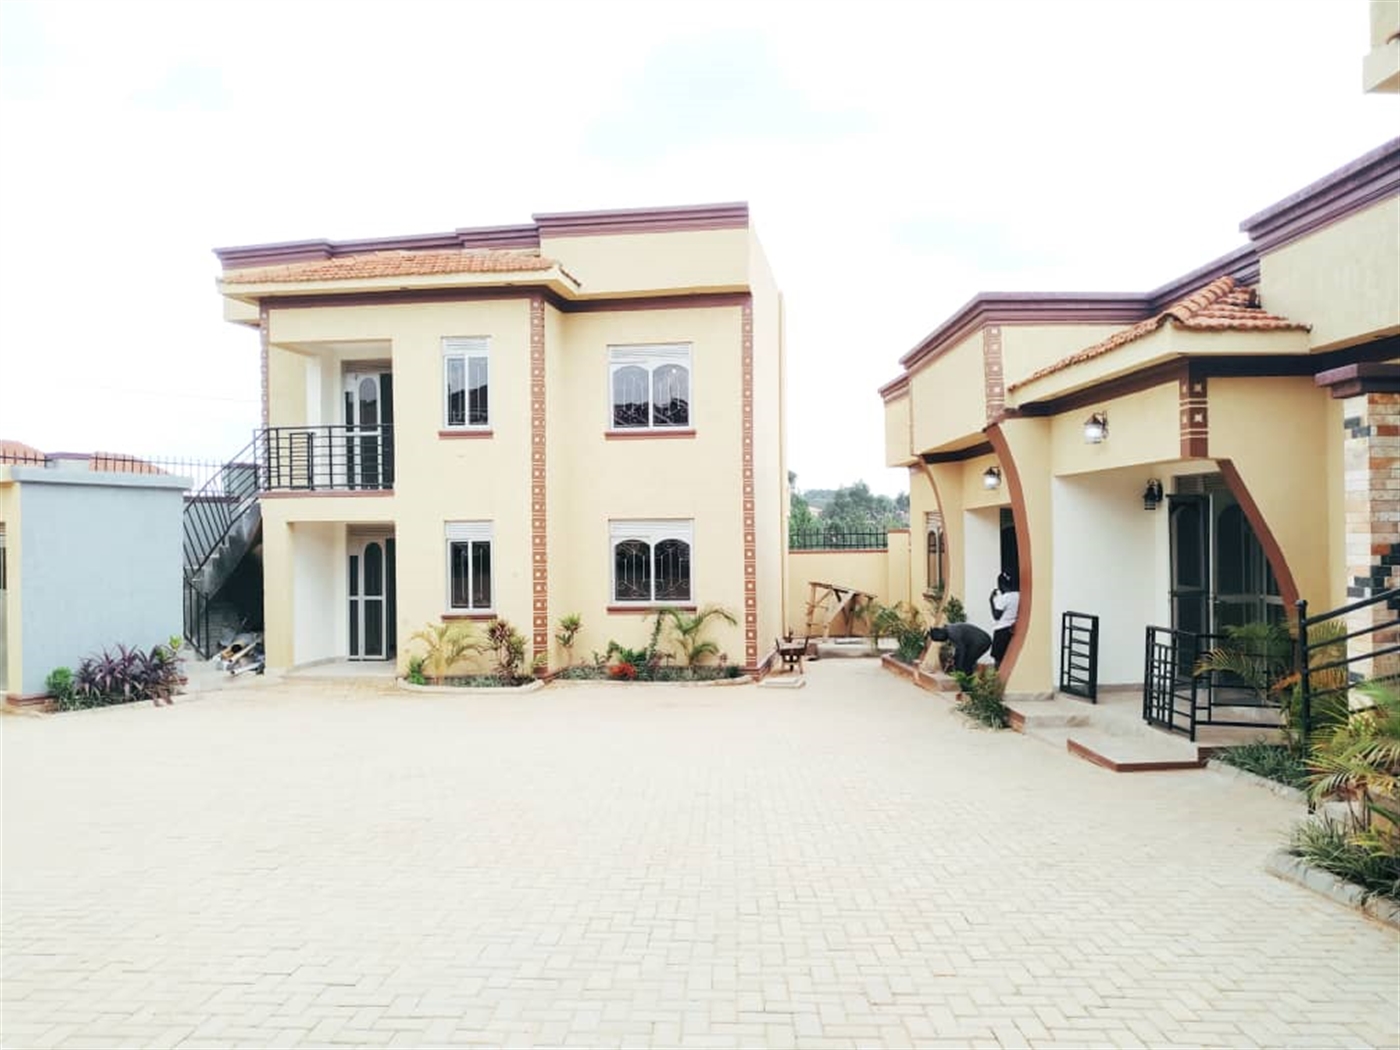 Rental units for sale in Buwate Wakiso